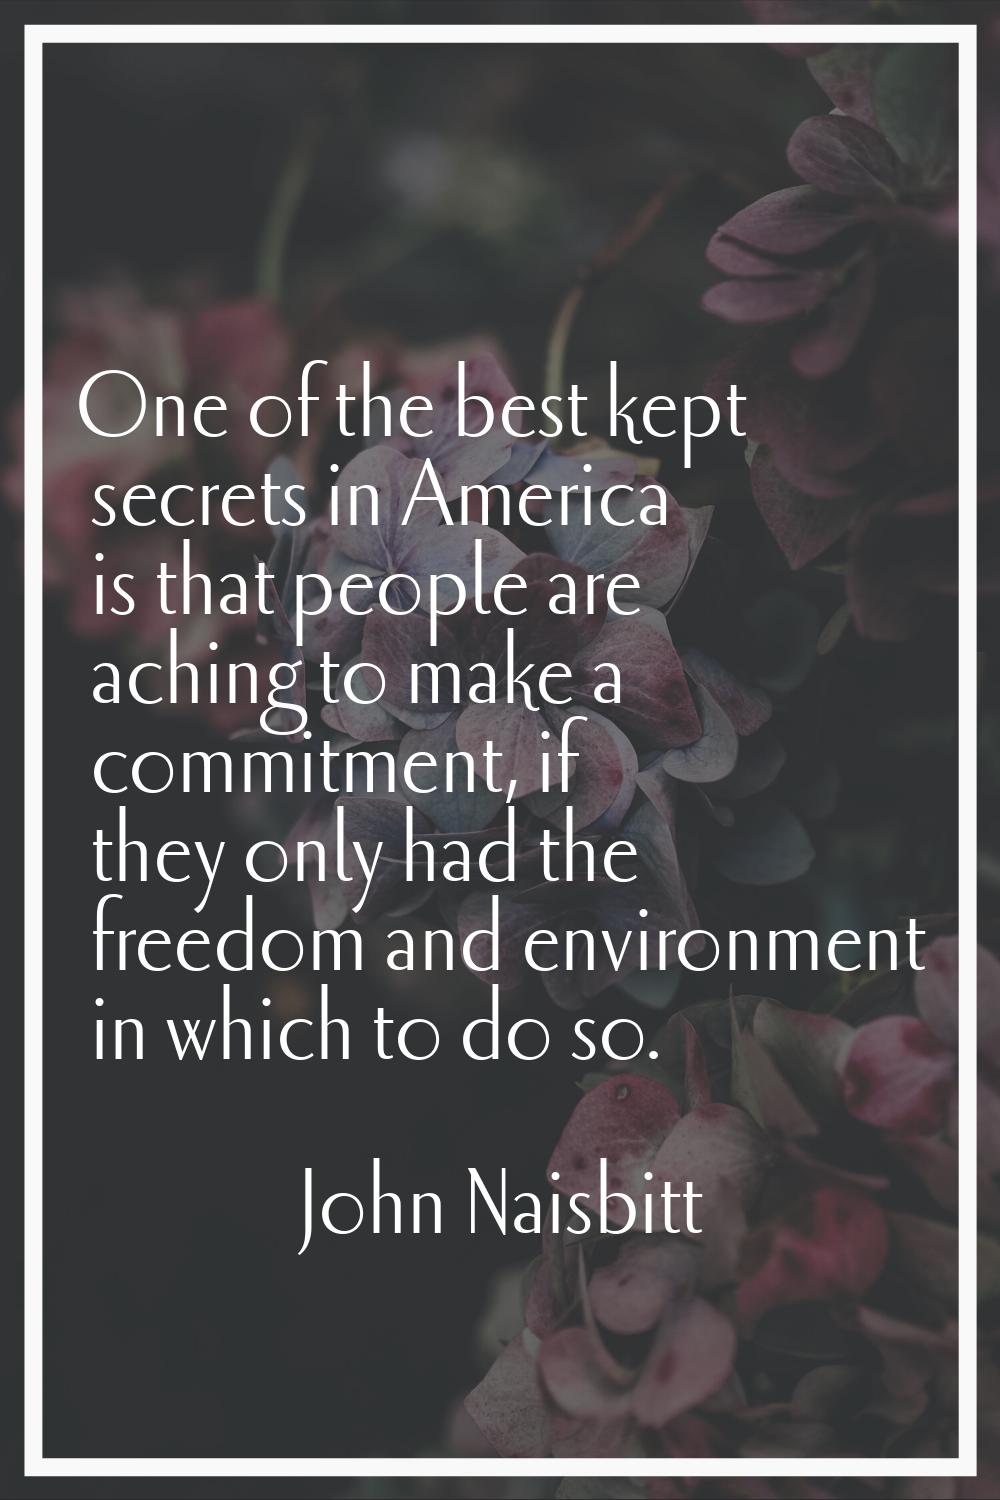 One of the best kept secrets in America is that people are aching to make a commitment, if they onl